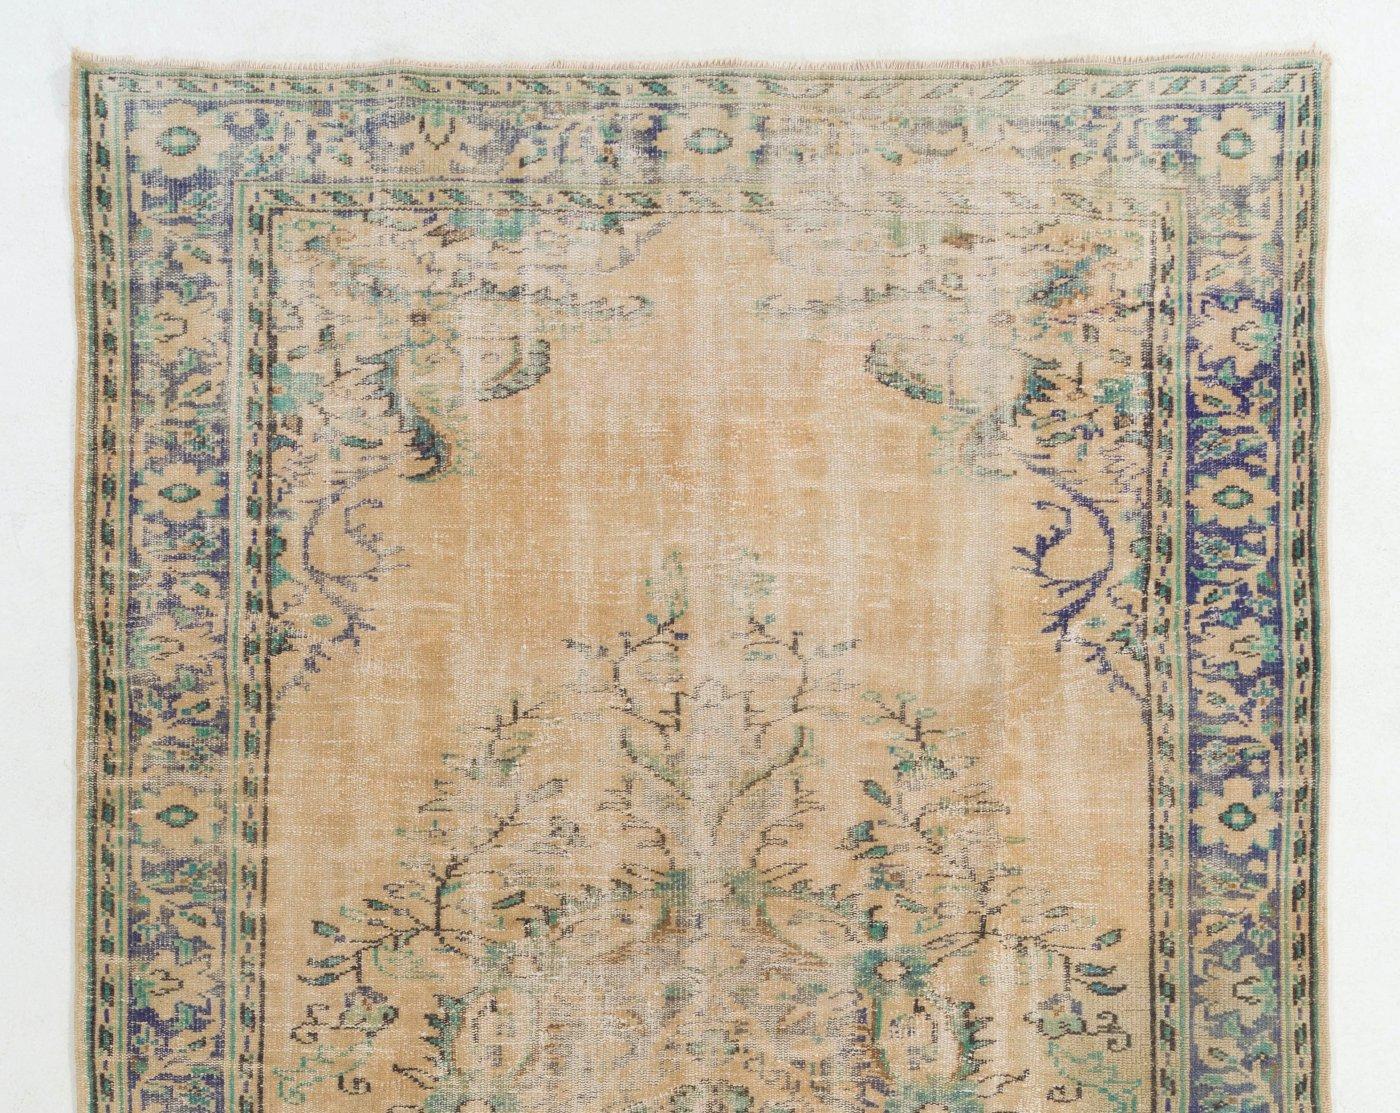 A finely hand-knotted vintage Turkish carpet from 1950s featuring an elegant medallion design. The rug has even low wool pile on cotton foundation. It is heavy and lays flat on the floor, in very good condition with no issues. It has been washed